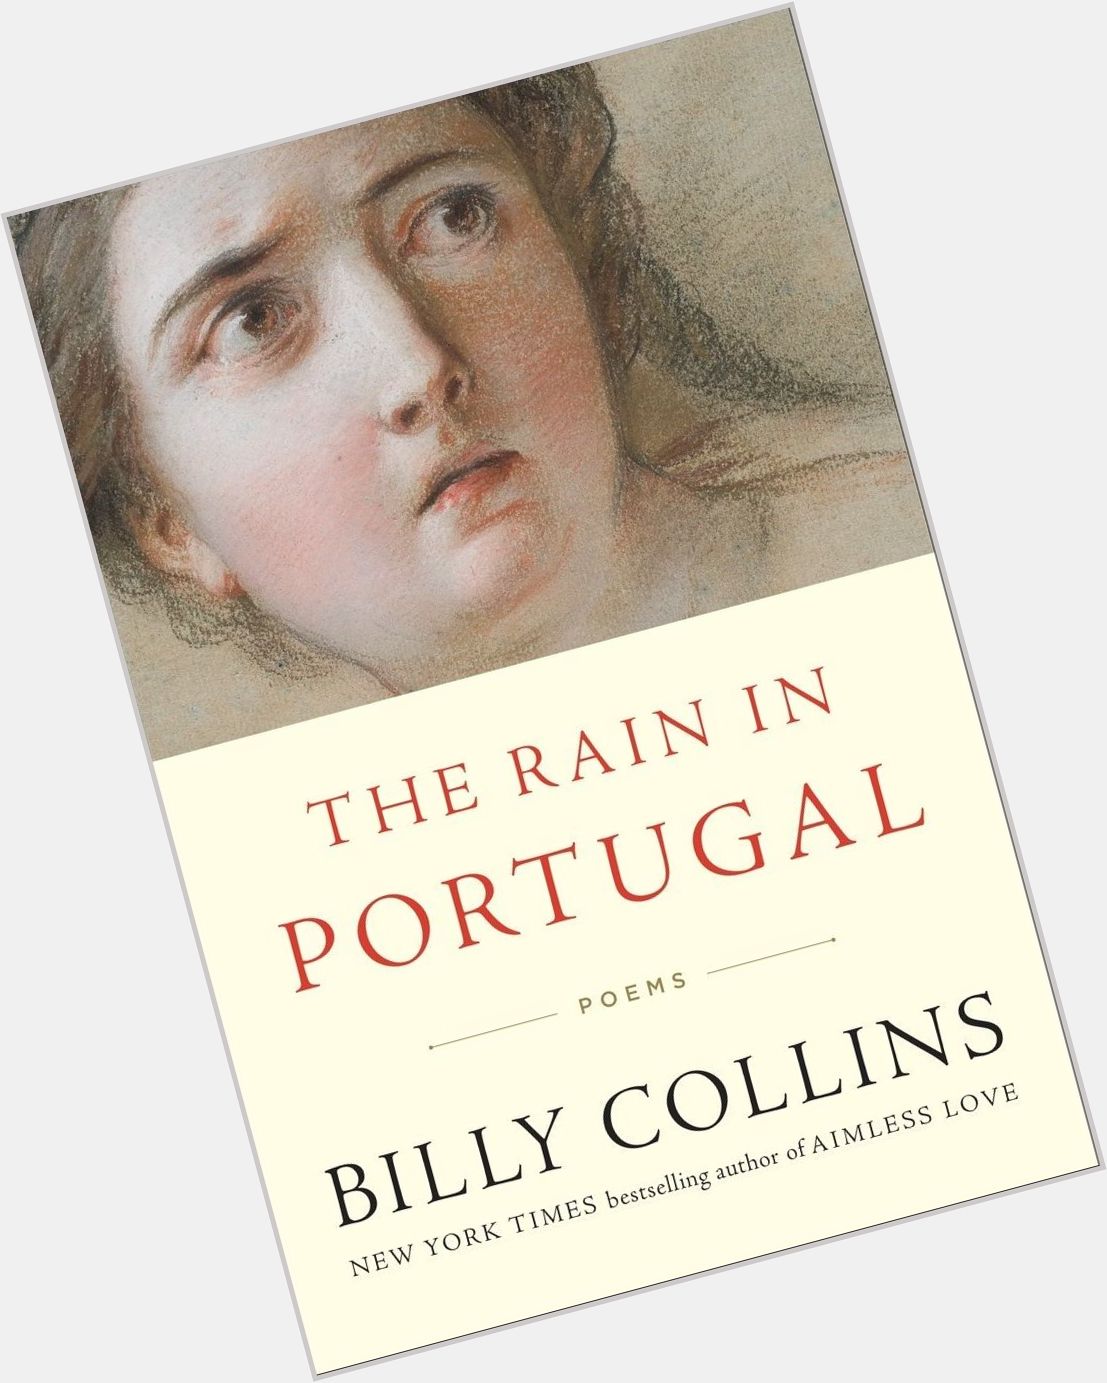 Happy birthday Billy Collins! Check out his newest book from KBL:  